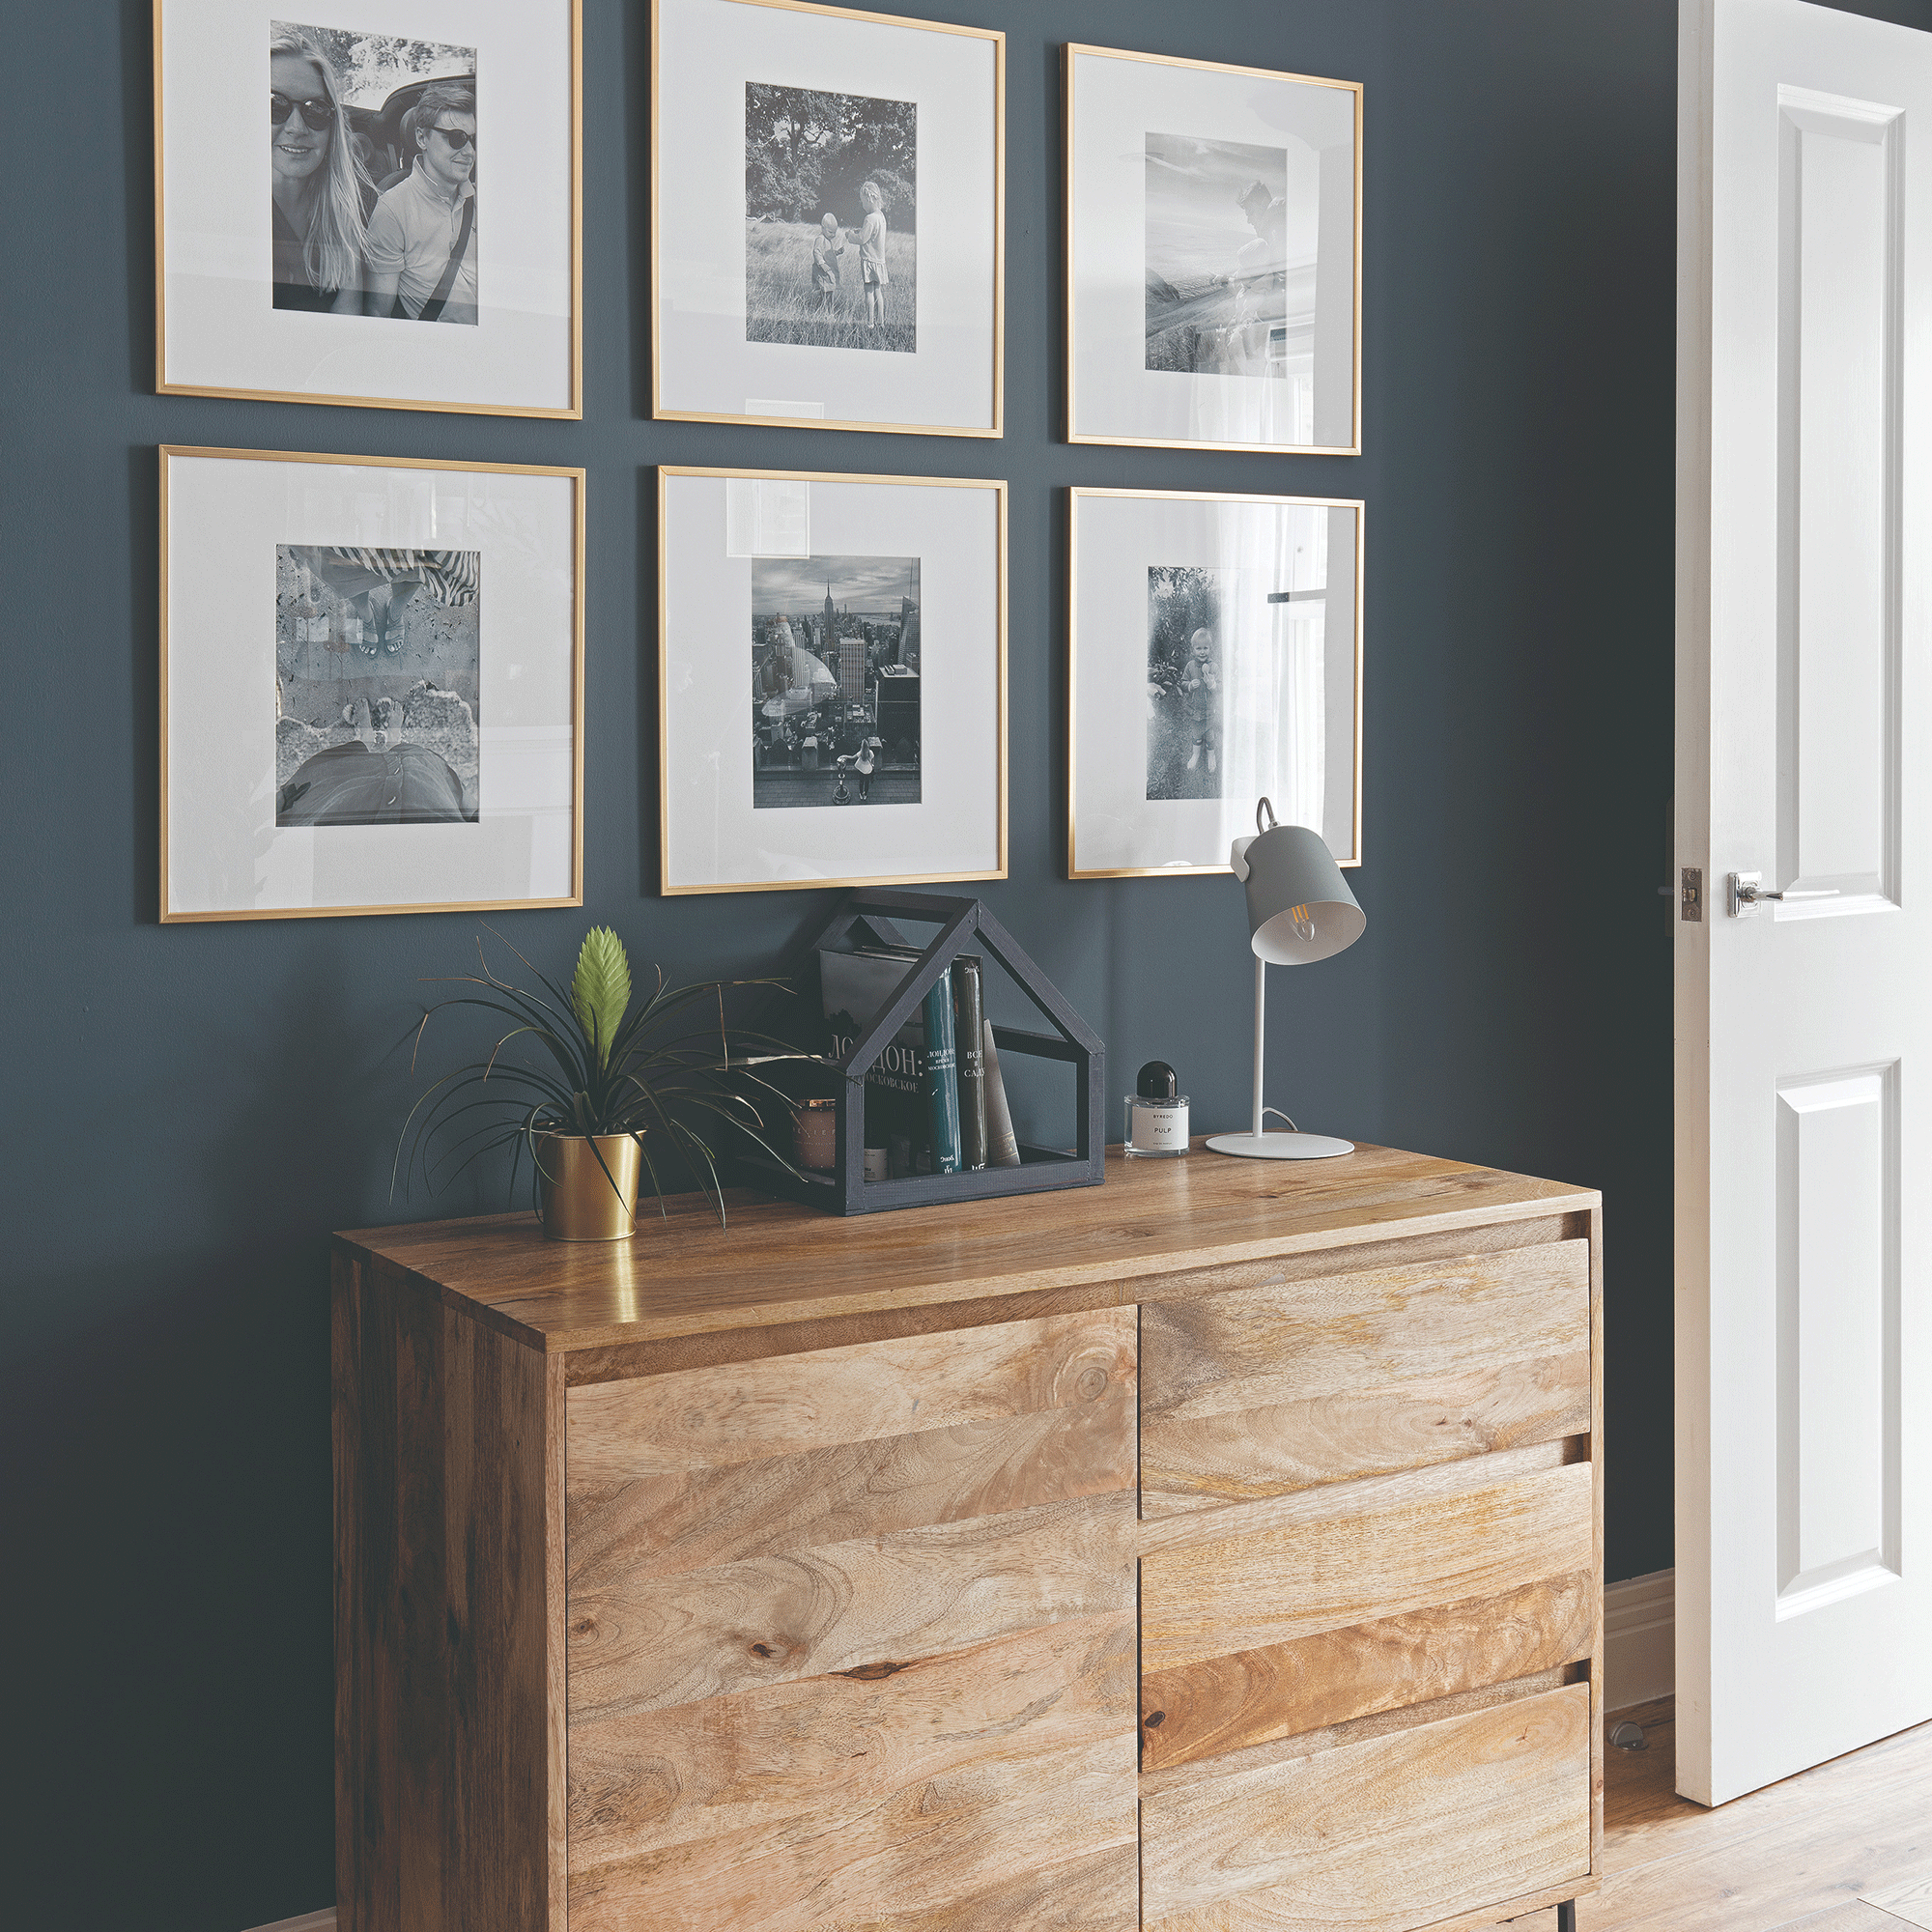 Wooden sideboard with gallery wall